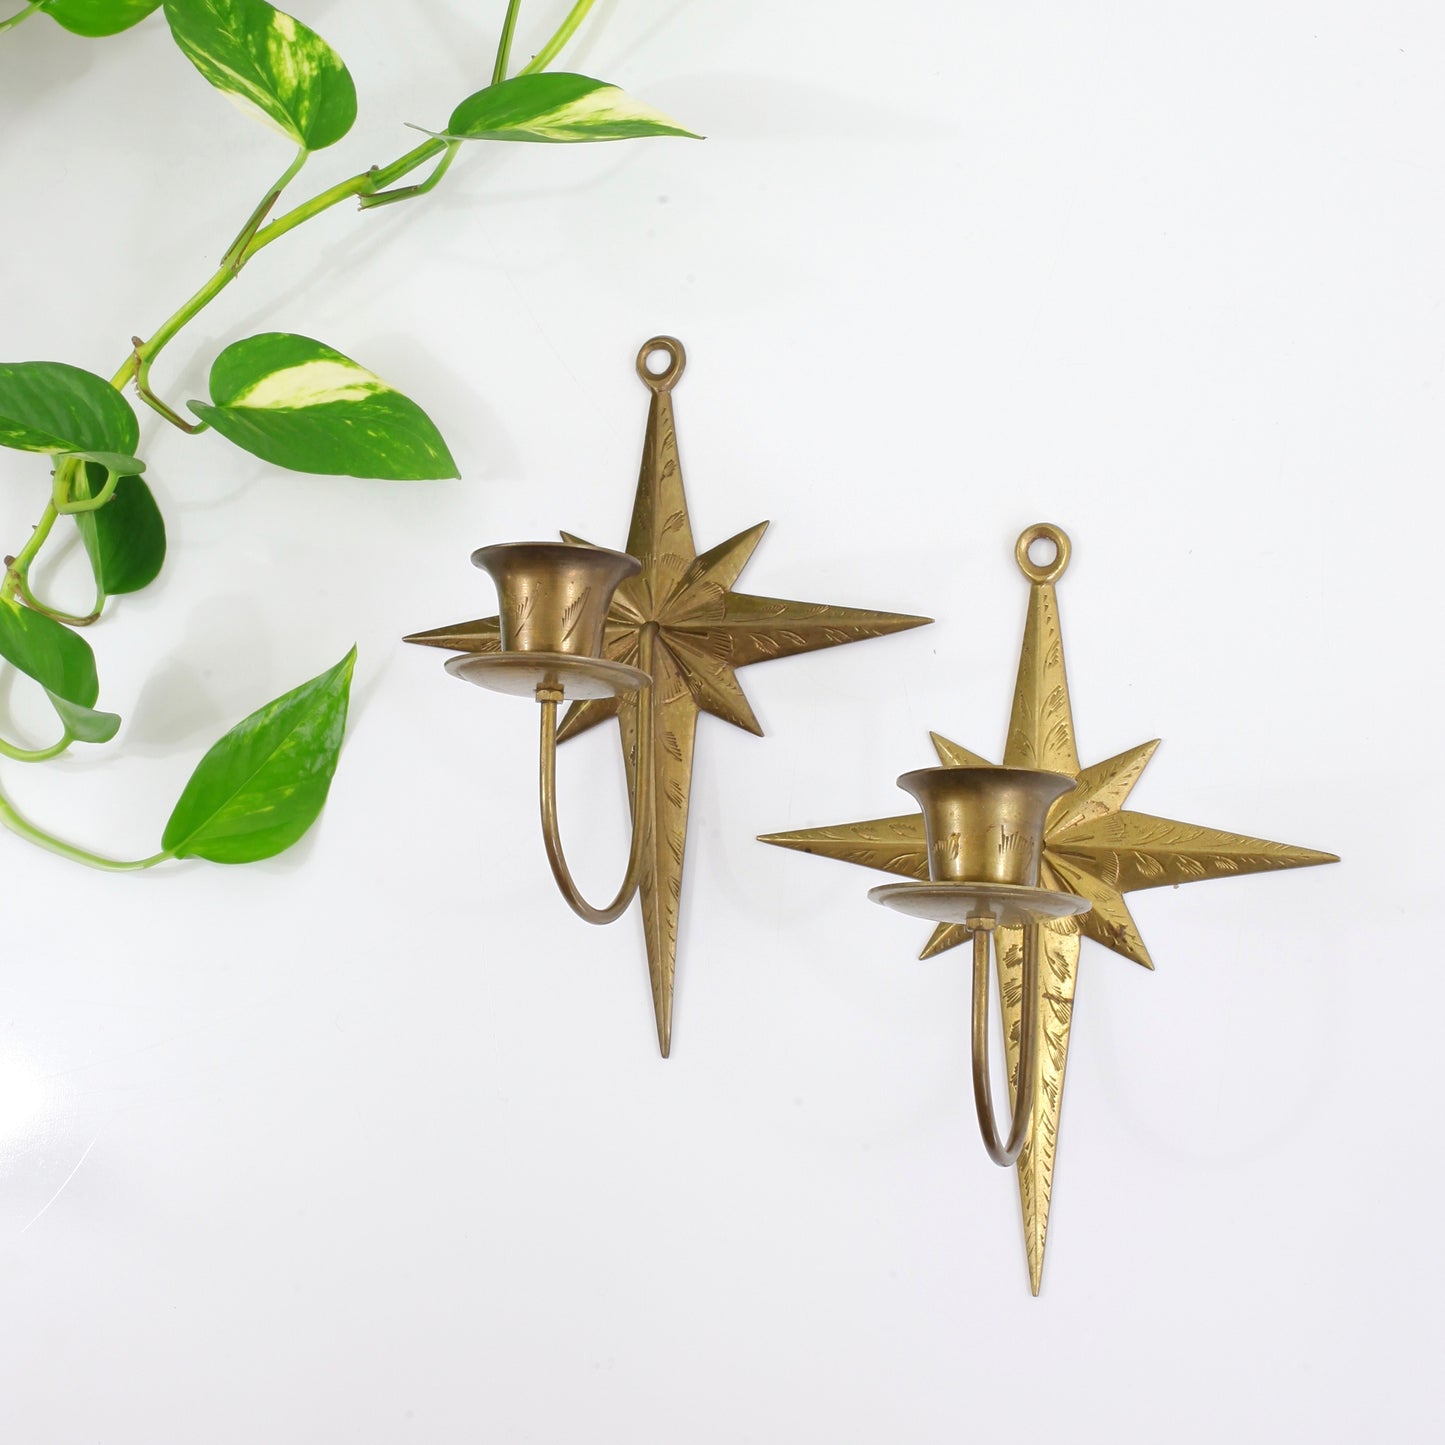 SOLD - Mid Century Modern Brass Starburst Wall Sconce Candle Holders